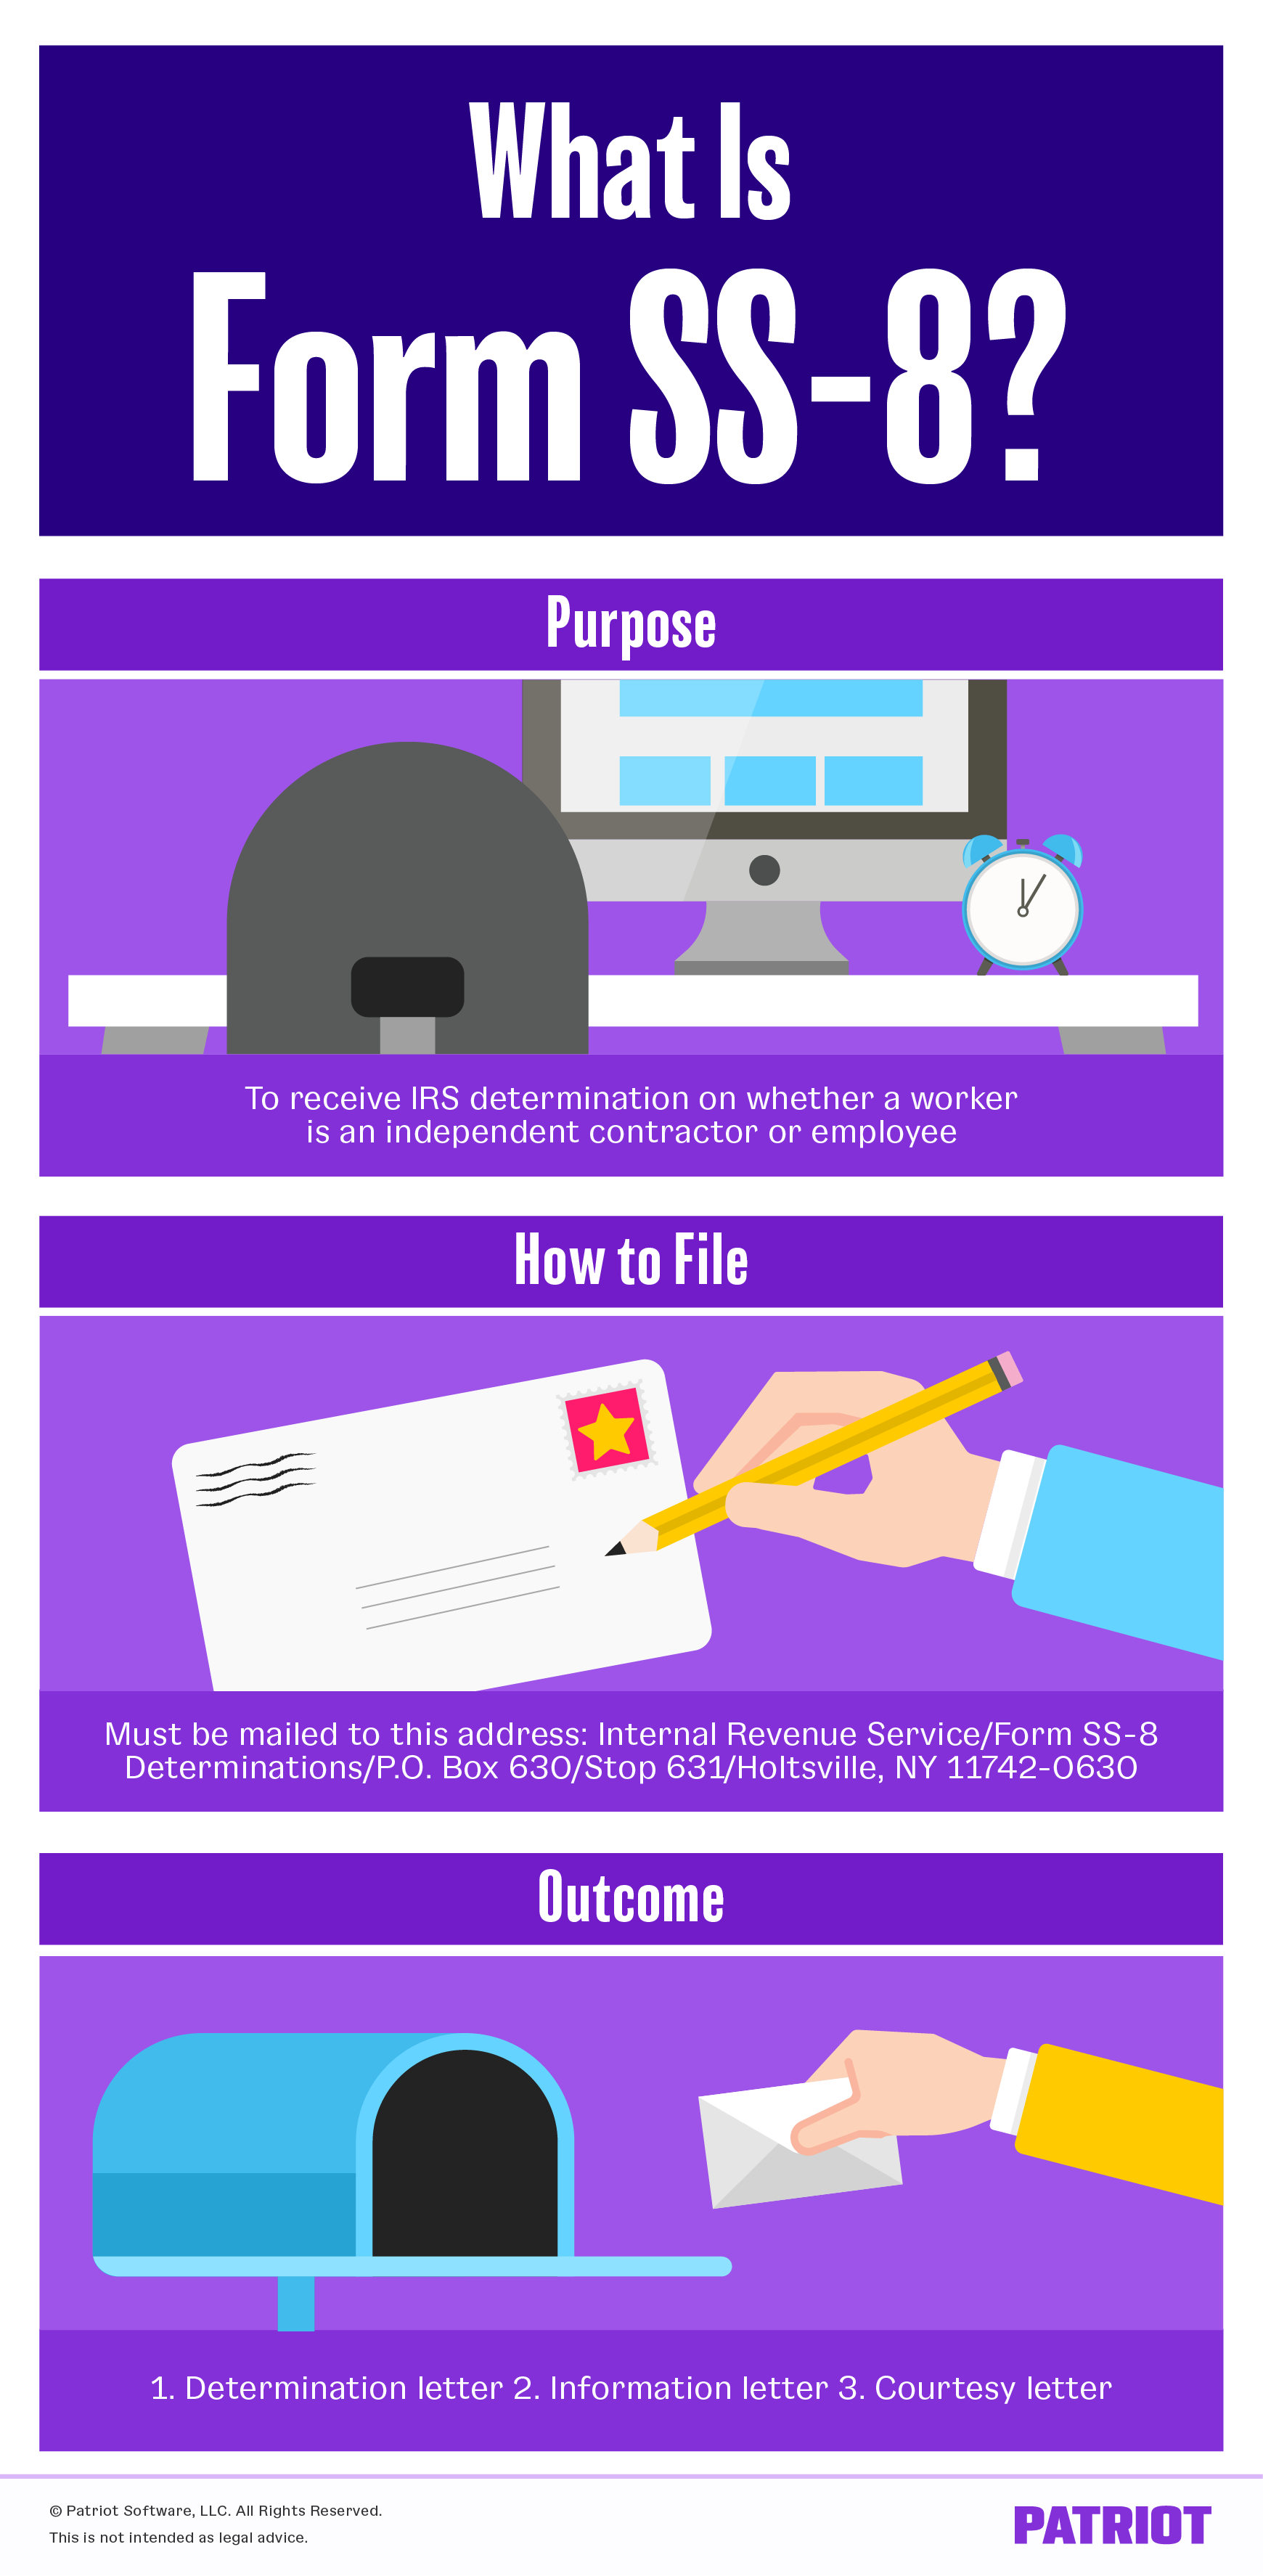 Form SS-8 infographic detailing purpose, how to file, and possible outcomes